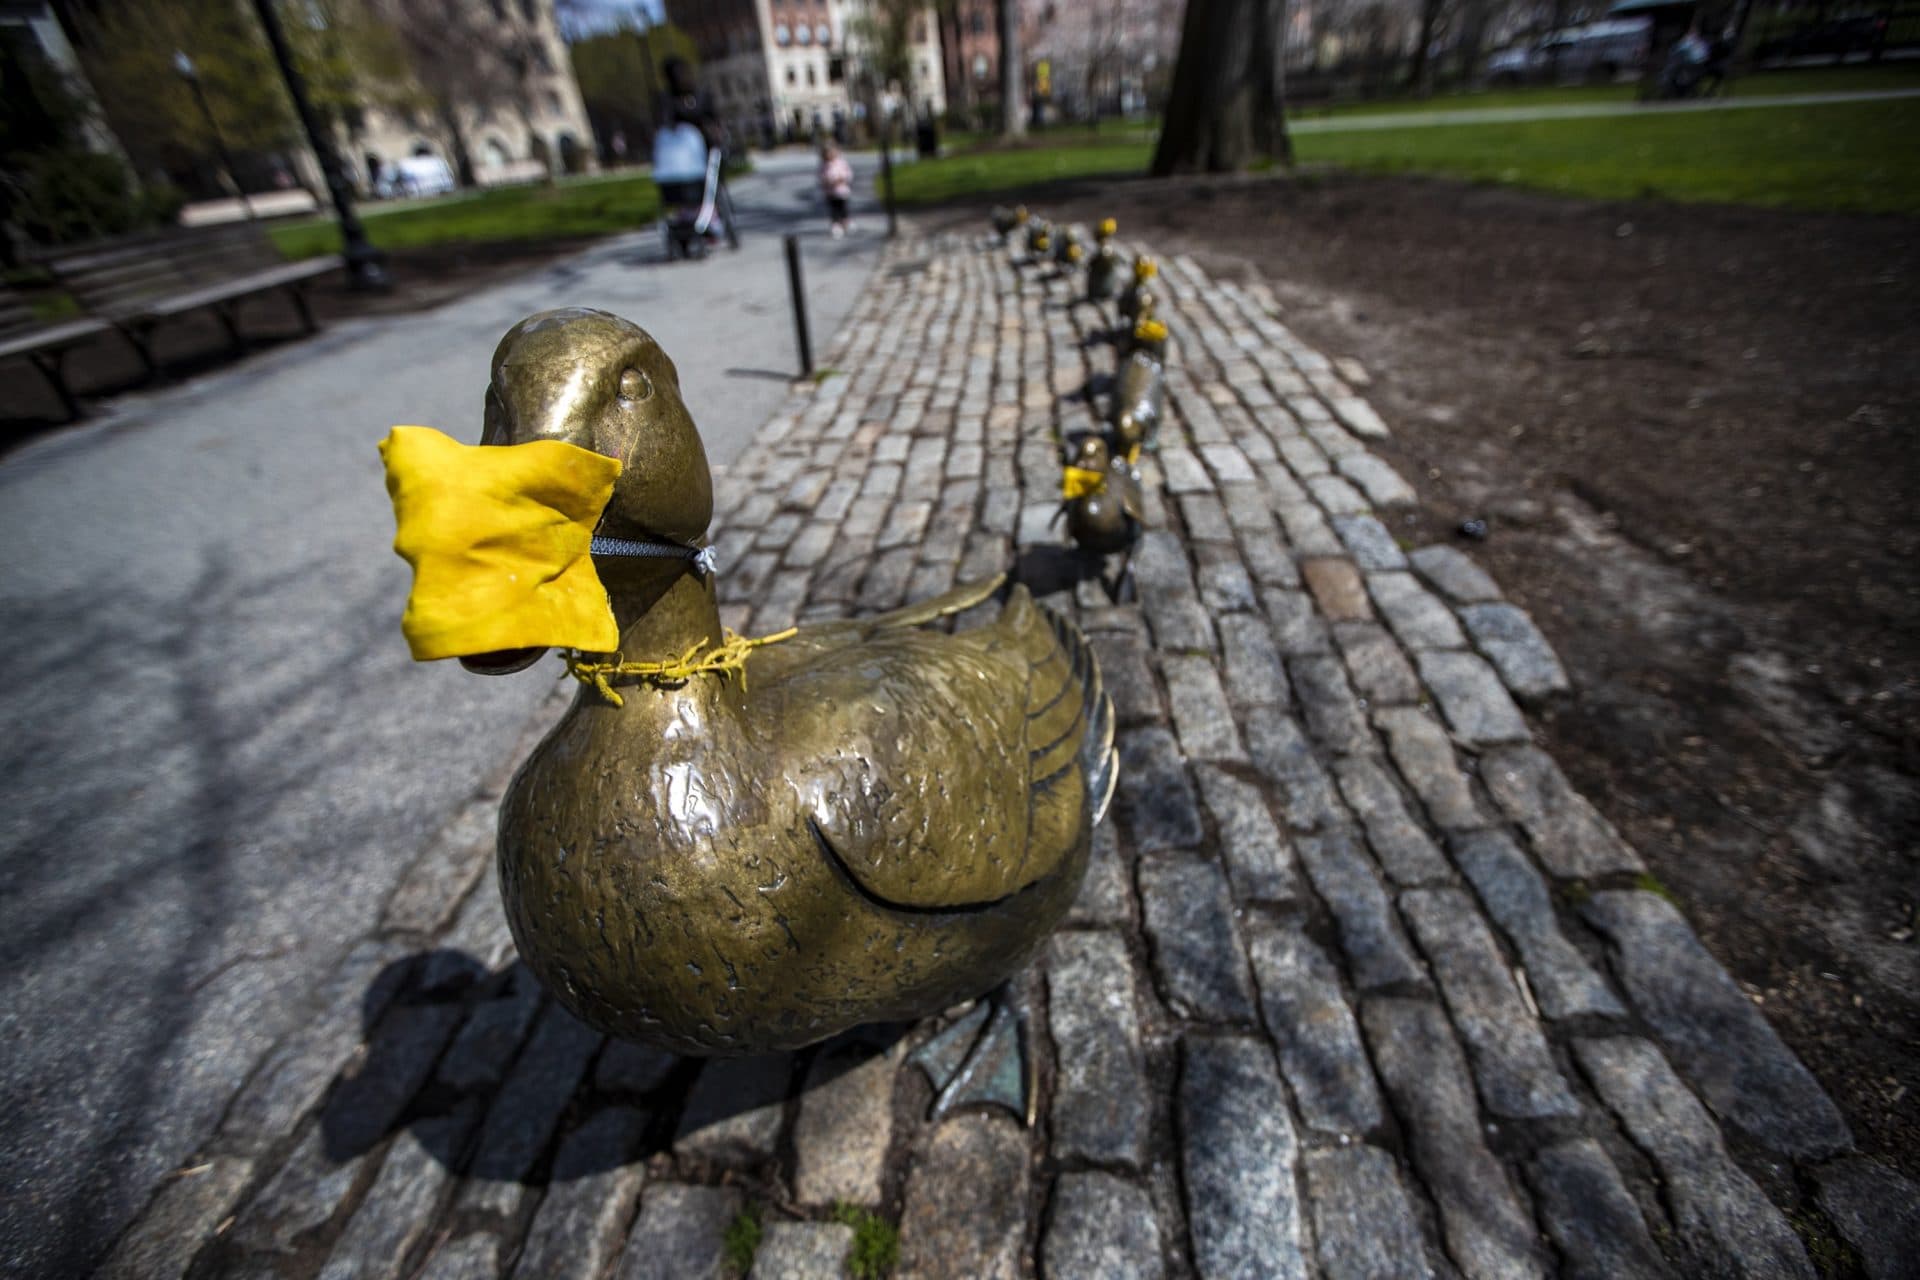 April 10: Even the ducks of the “Make Way For Ducklings” sculpture in the Boston Public Garden have donned yellow masks. (Jesse Costa/WBUR)